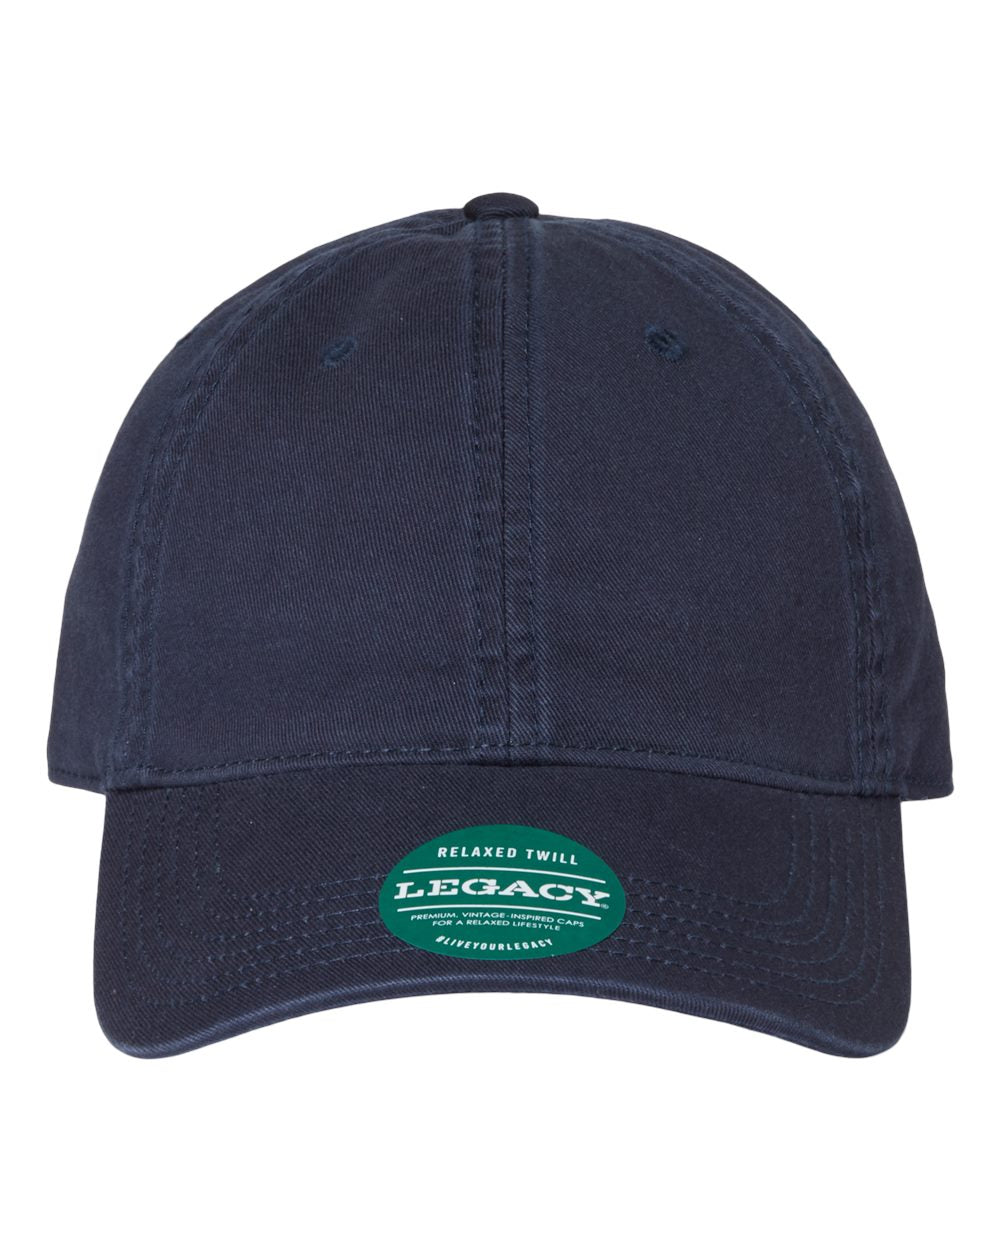 LEGACY-Relaxed Twill Dad Hat